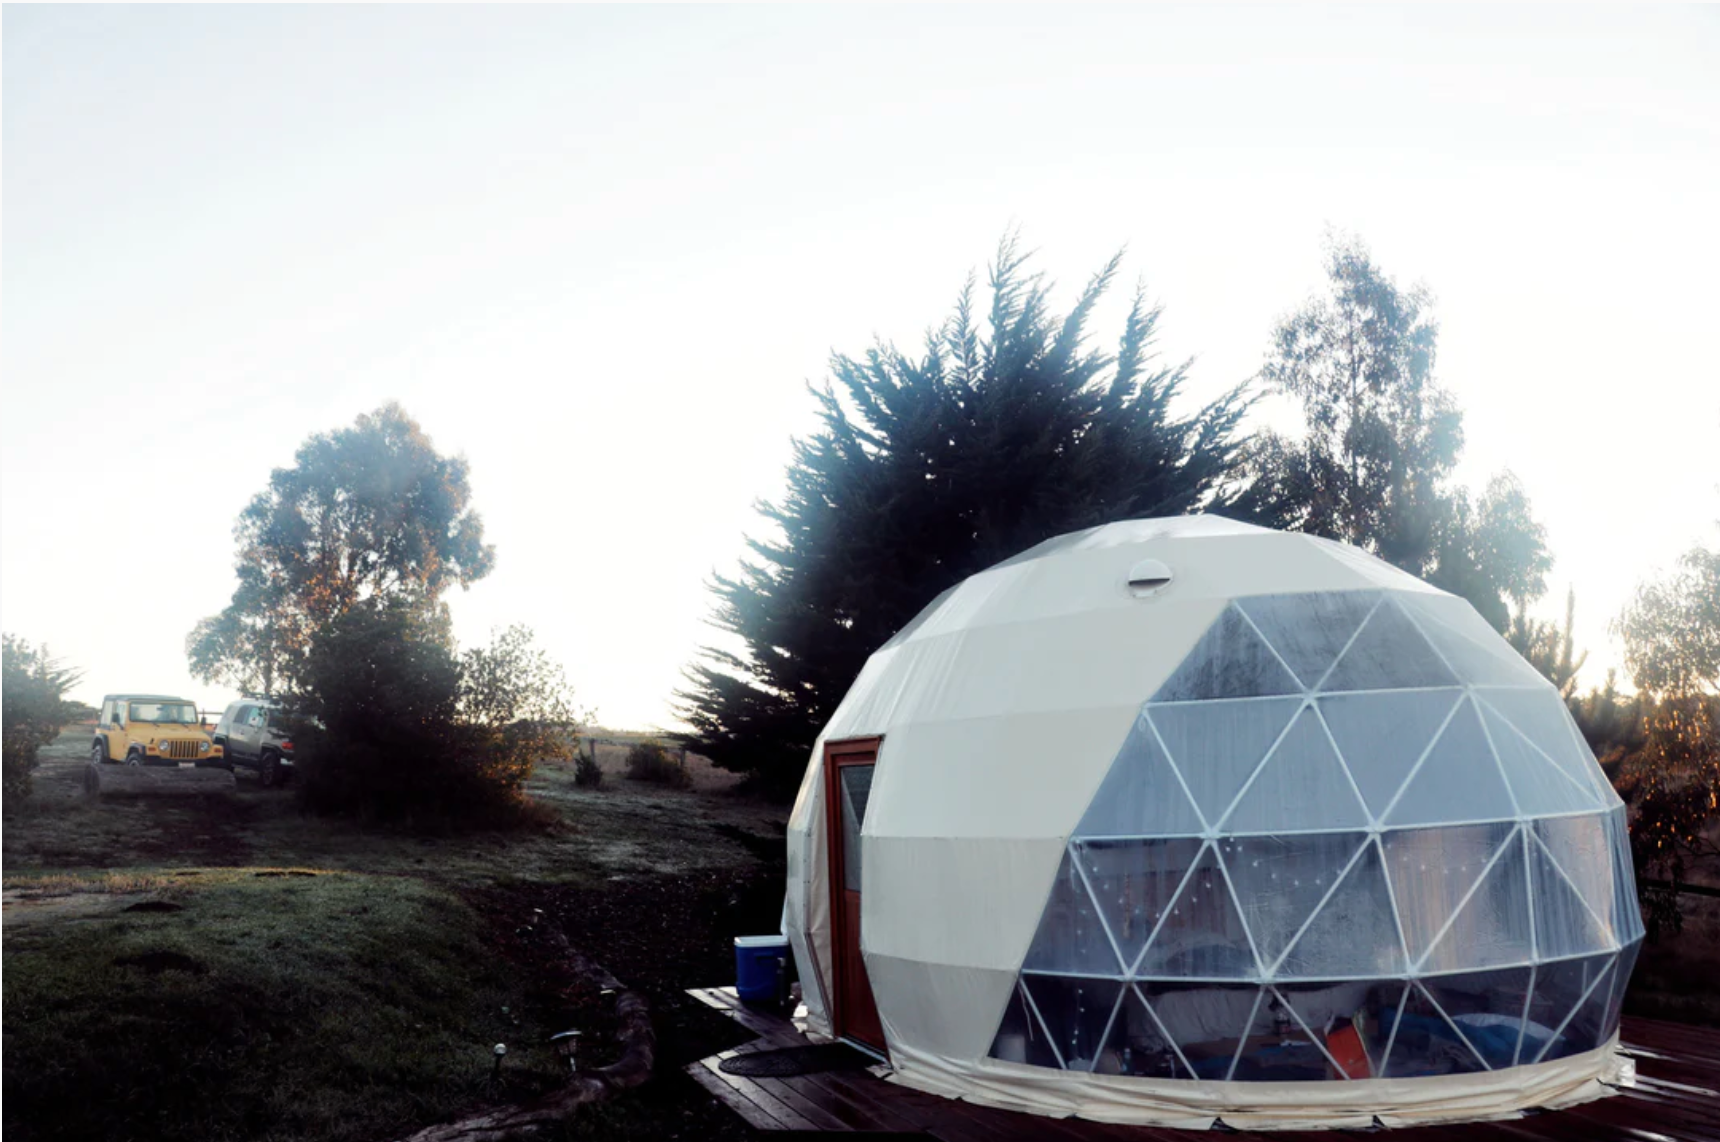 Exclusive oval dome kit for retreats / ADU / glamping / guest House/ yoga studio / getaway home